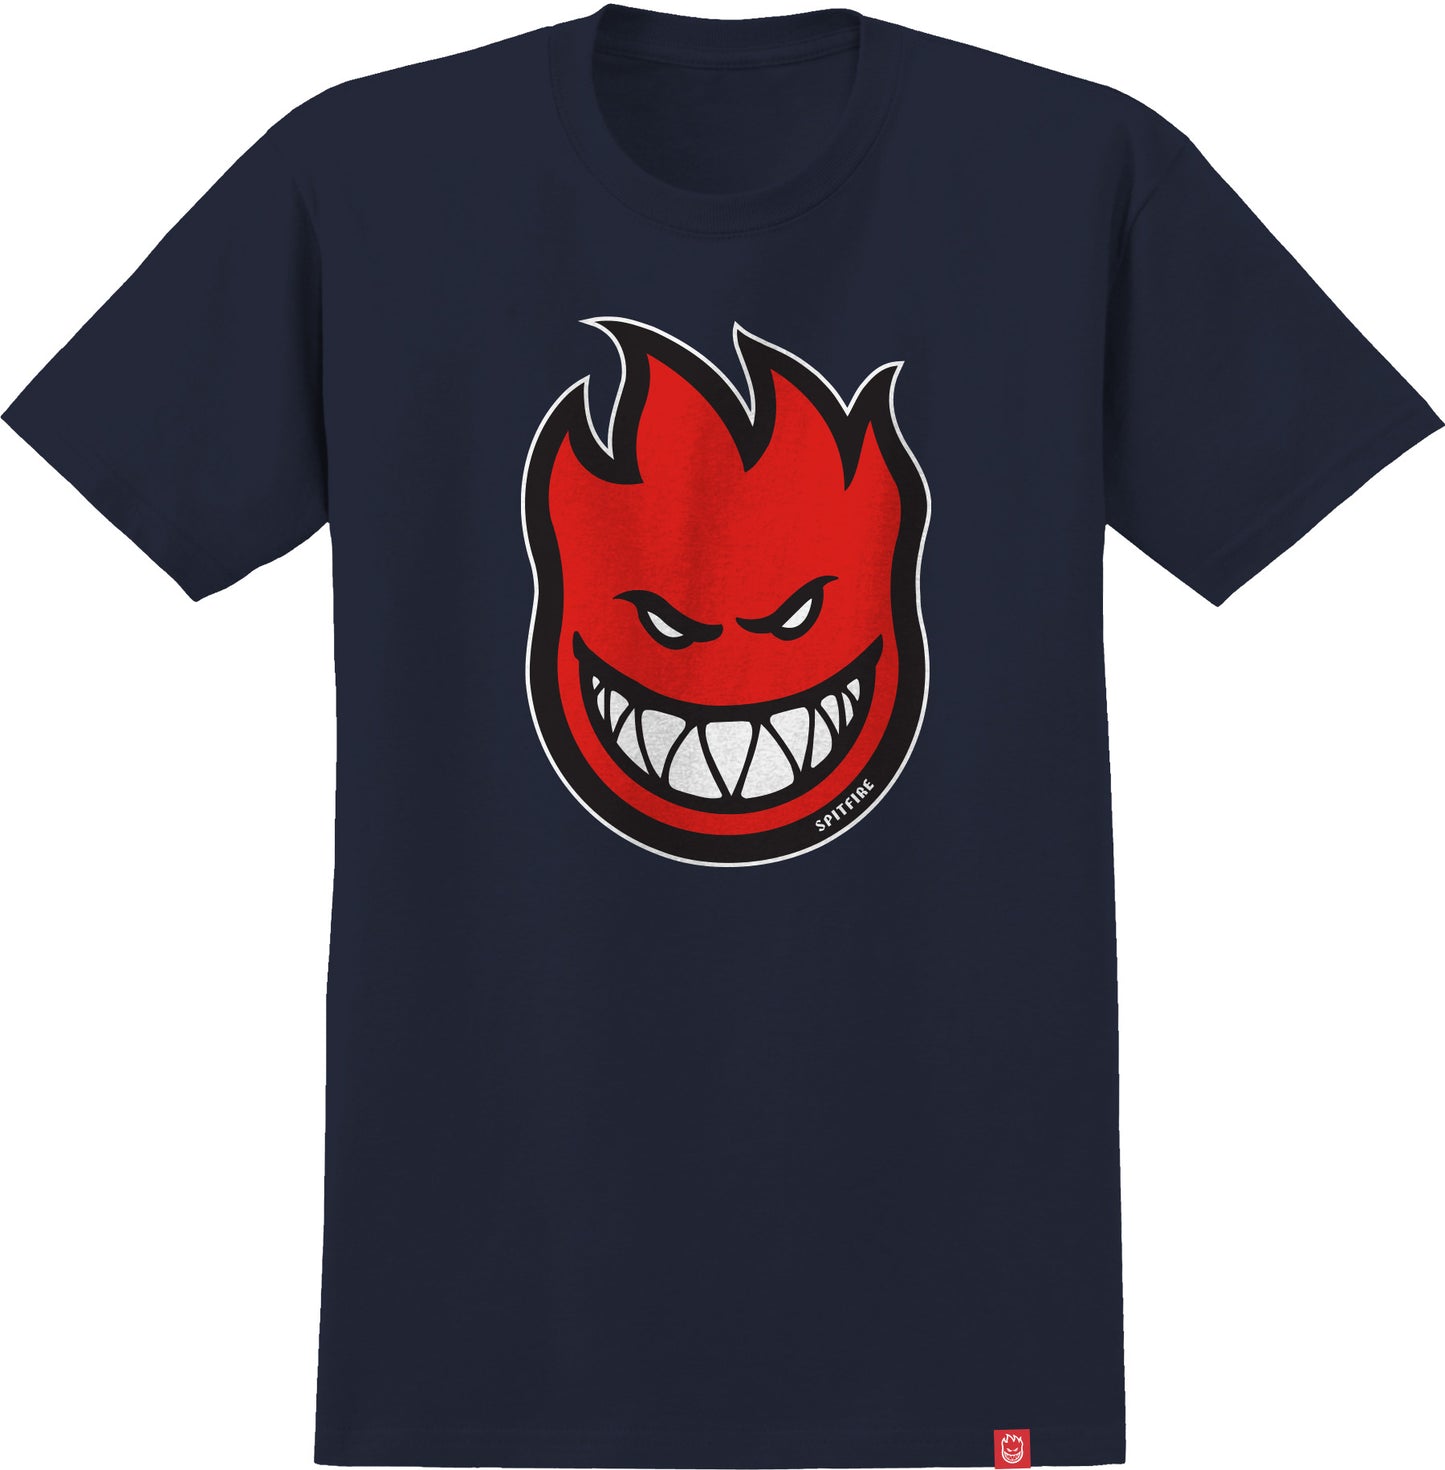 SPITFIRE - BIGHEAD FILL YOUTH TEE - NAVY/RED